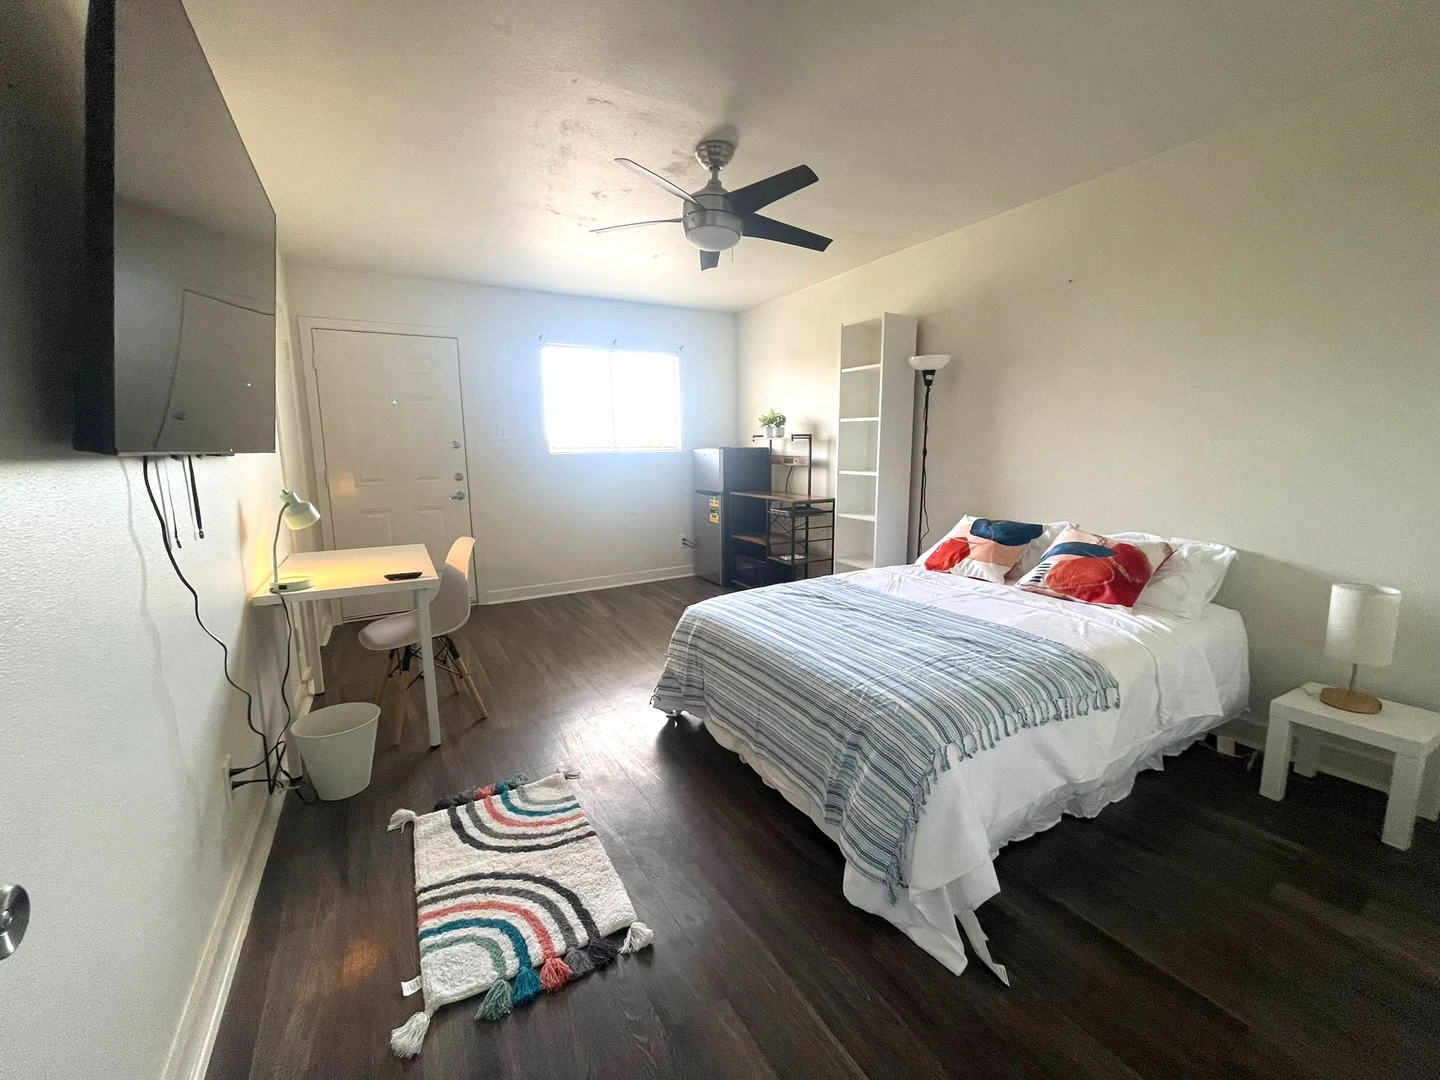 Room for rent with double bed Austin